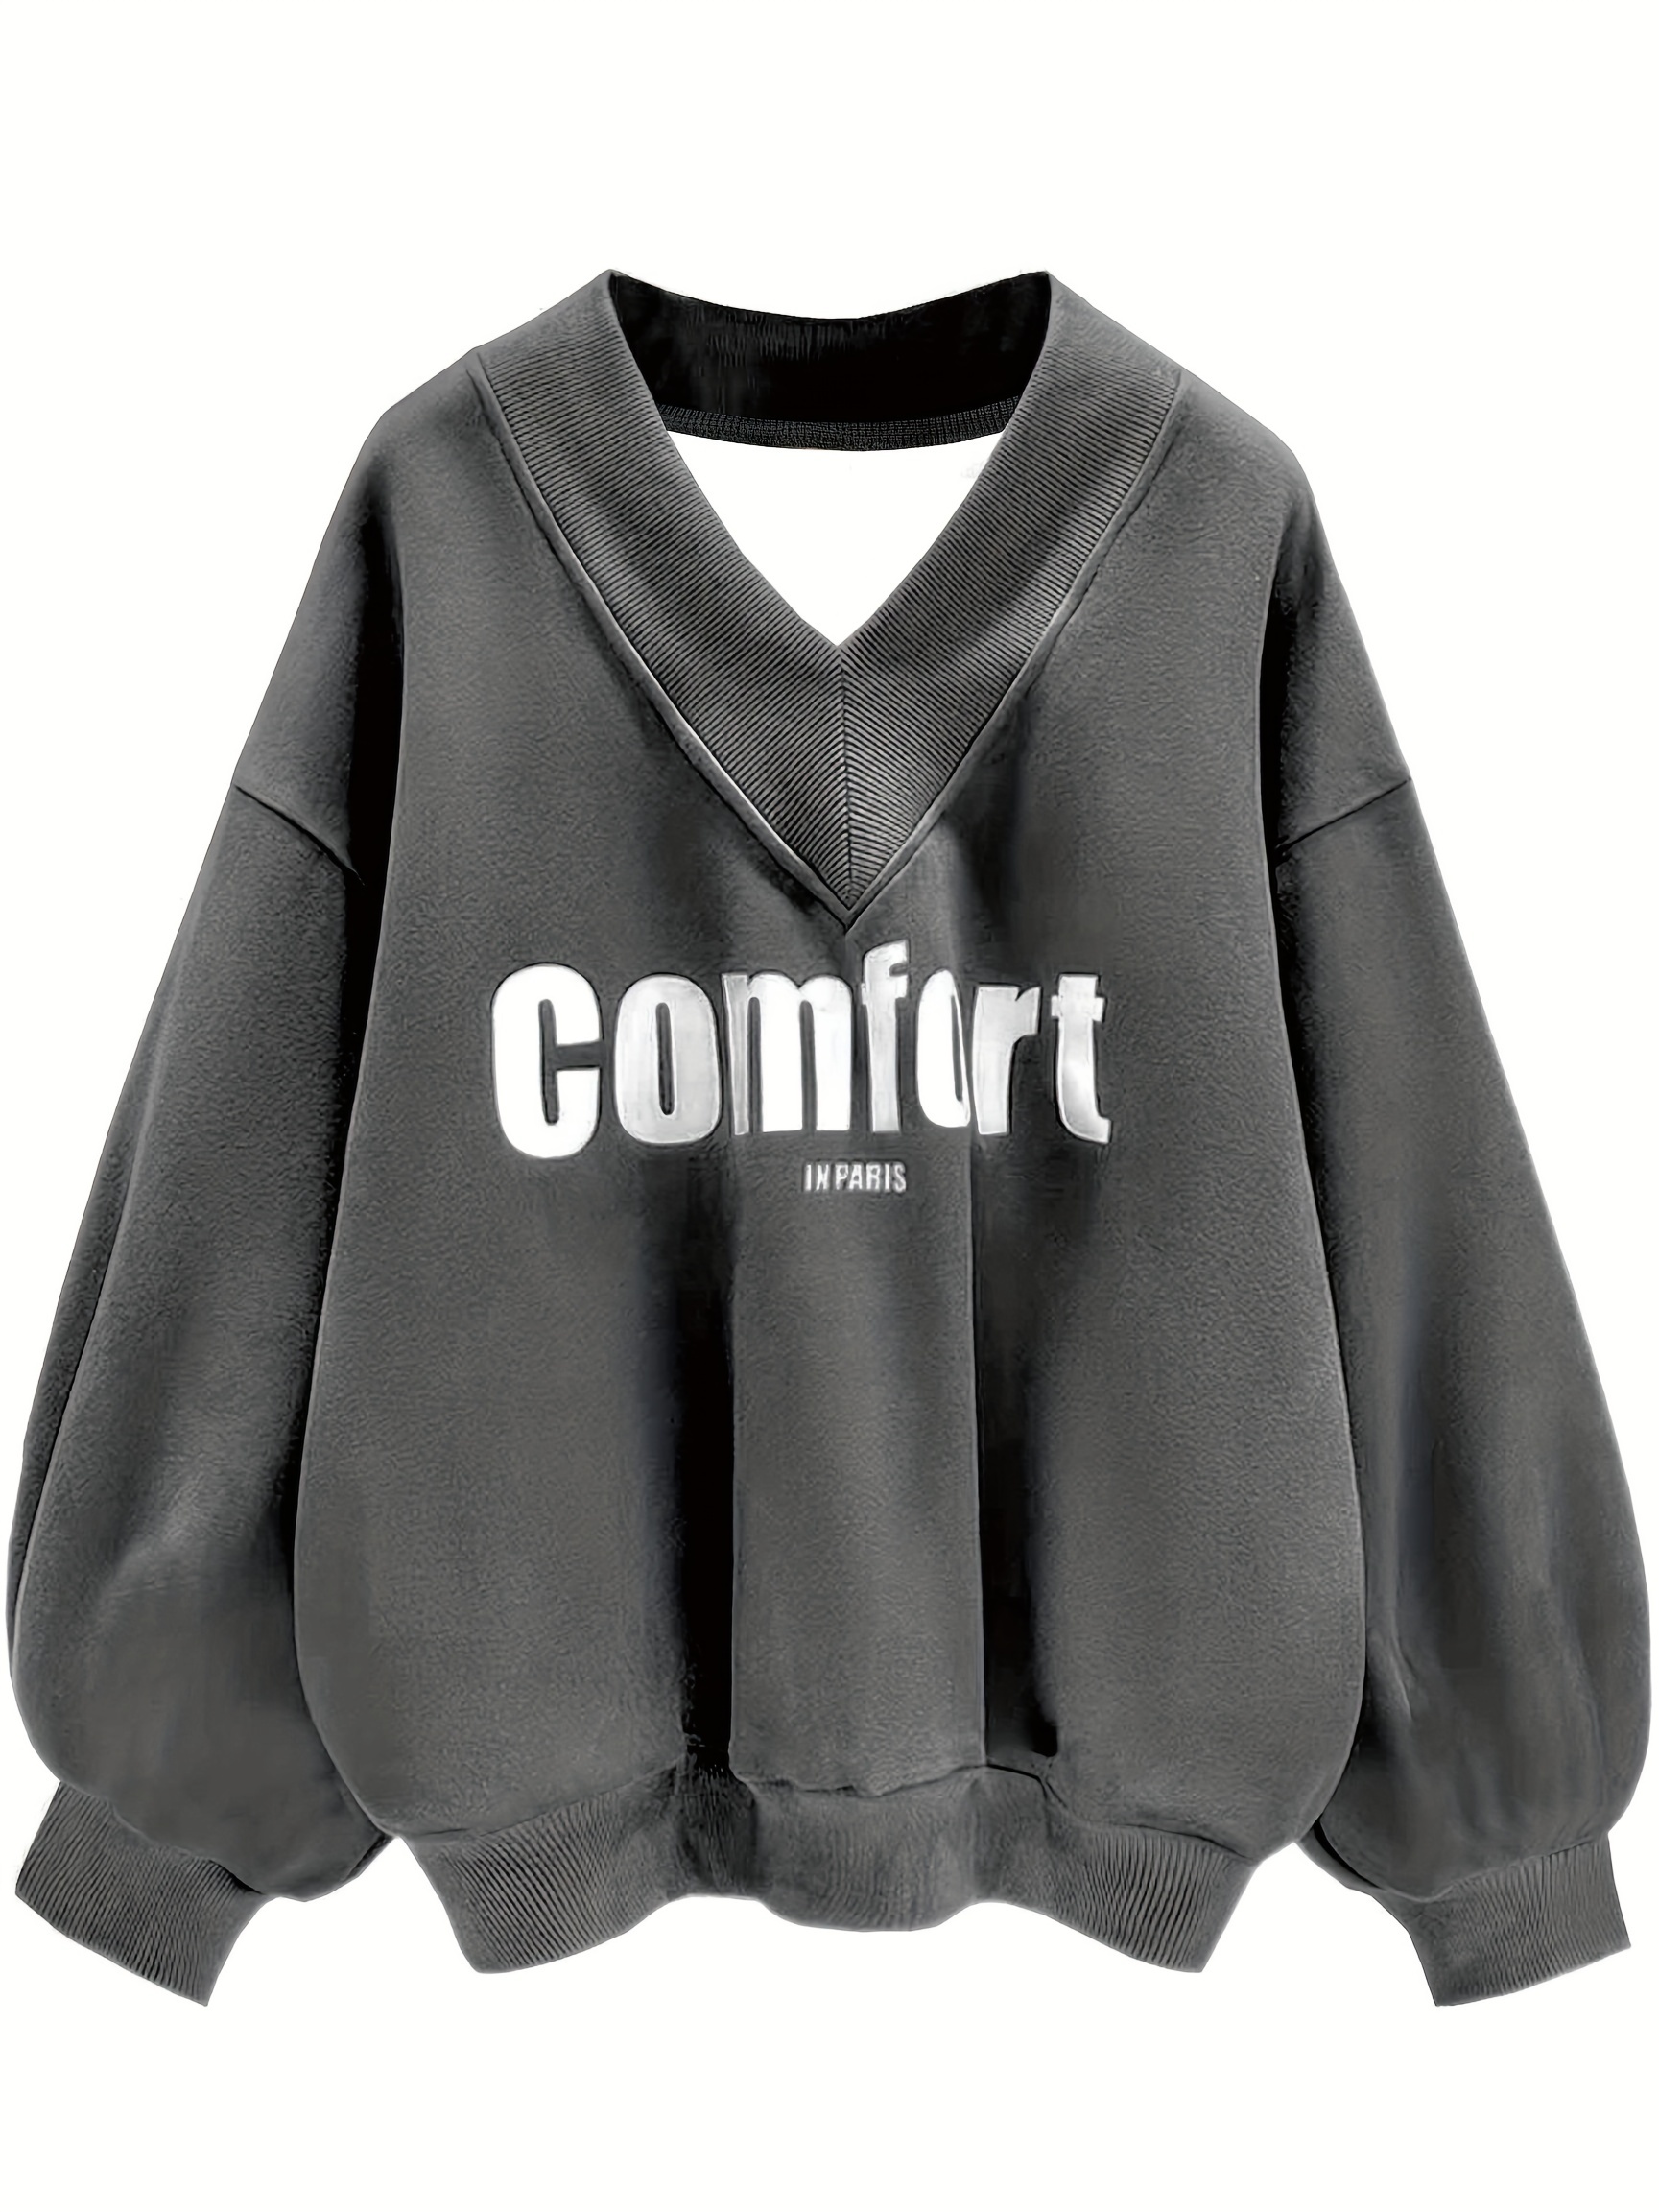 TQWQT Men's Oversized Pullover Letter Print Graphic Hoodies Long Sleeve  Casual New York Sweatshirt with Pocket Dark Gray L 